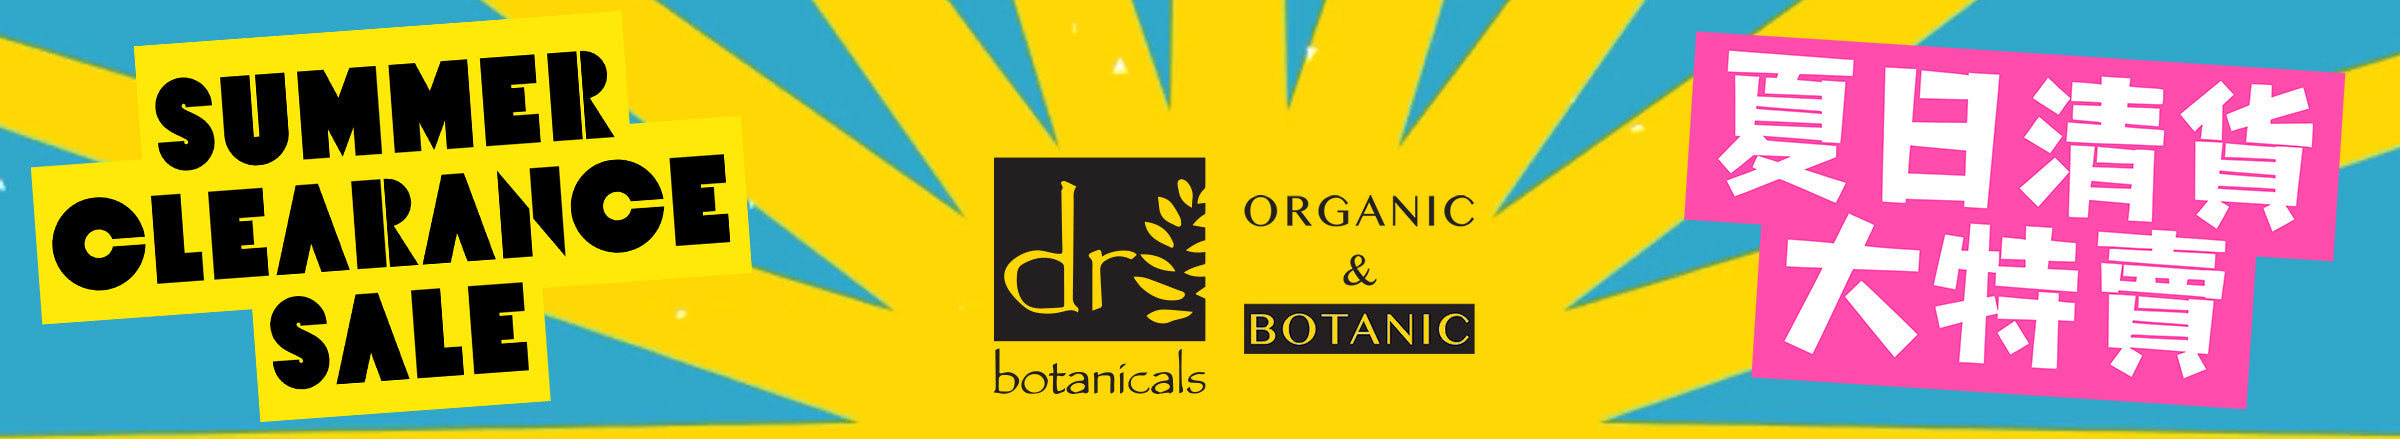 Dr. Botanicals and Organic & Botanic Summer Clearance Sale SkinCure Asia